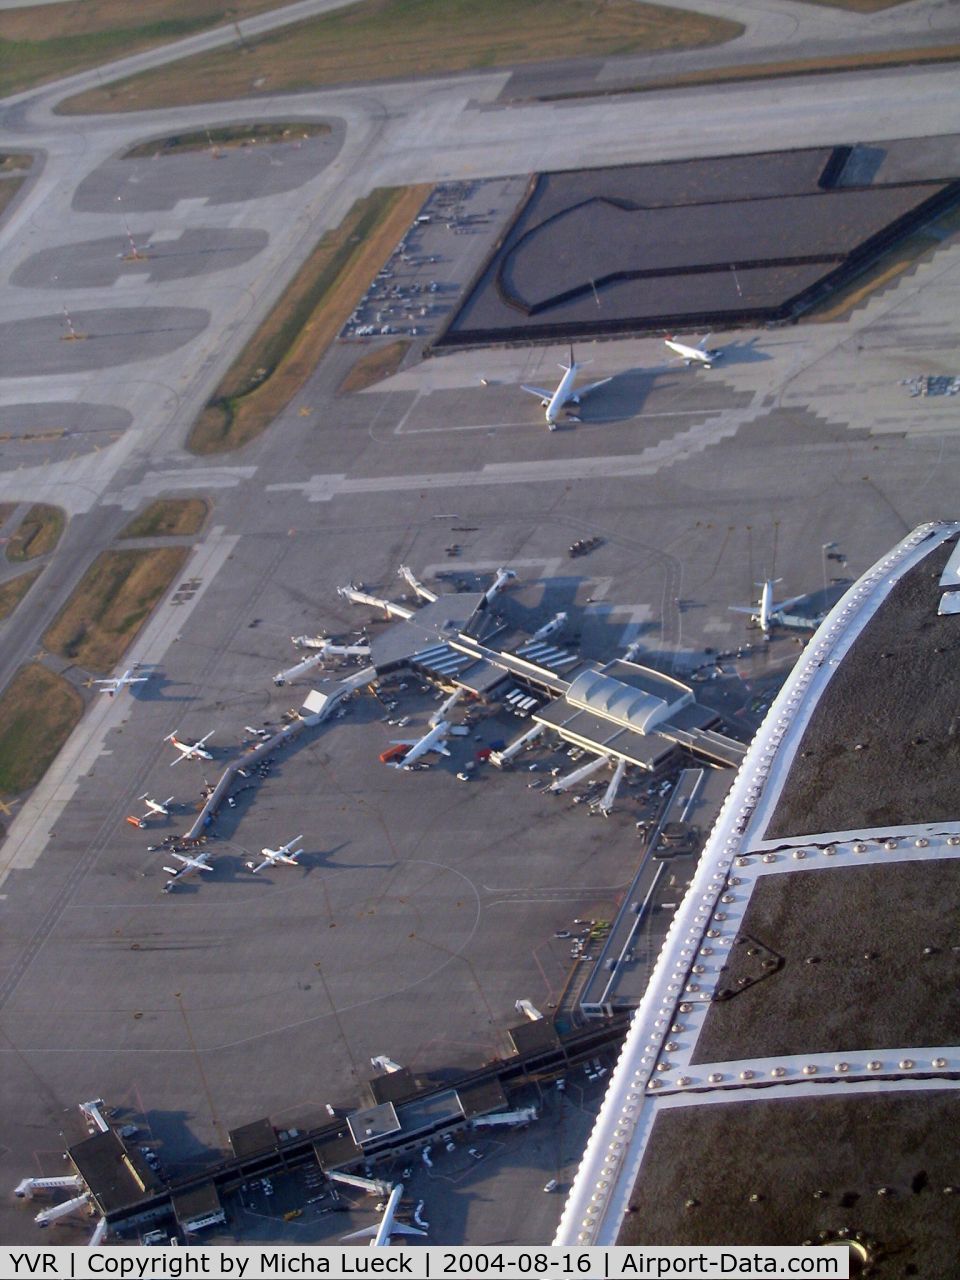 Vancouver International Airport, Vancouver, British Columbia Canada (YVR) - Seen from Harbour Air Single Otter C-GUTW